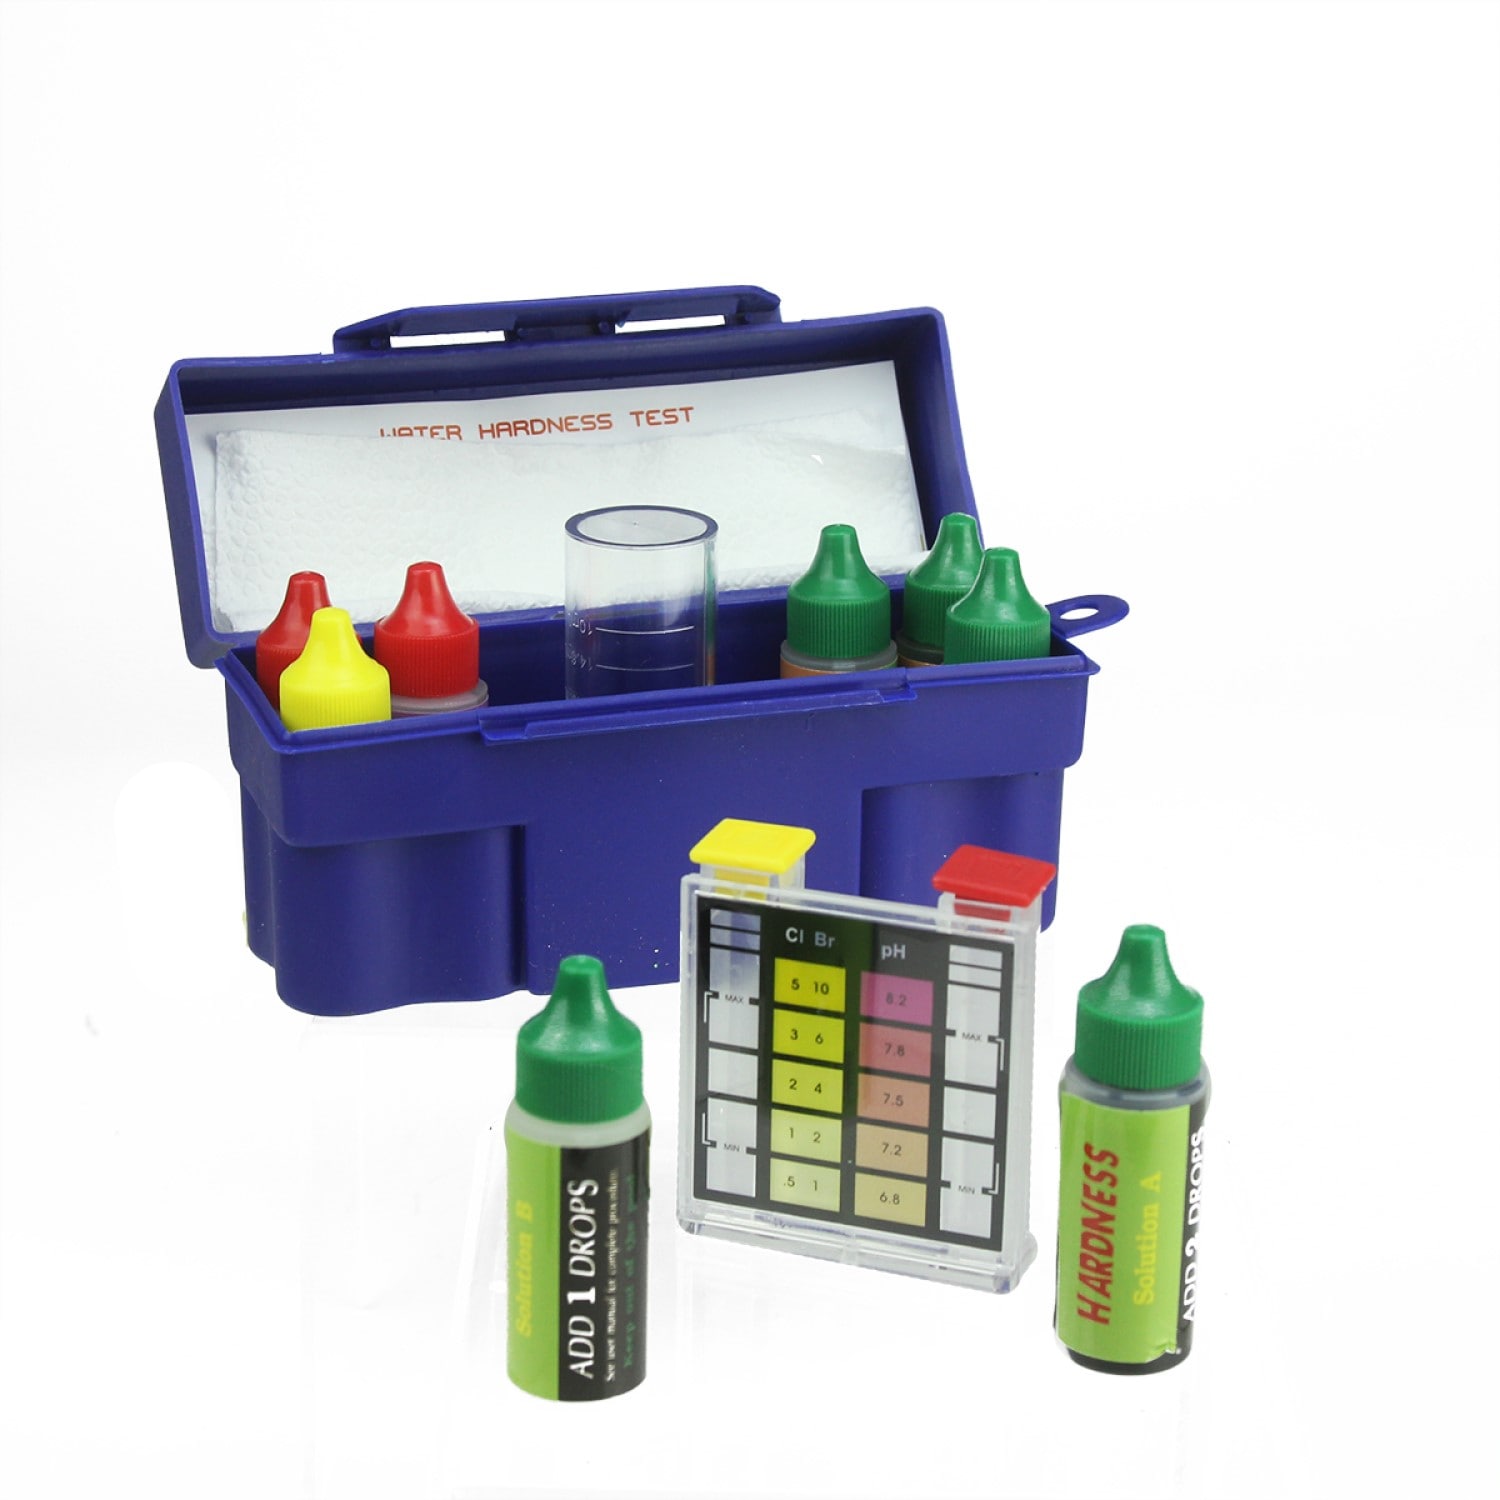 6-Pack Pool Test Kit for Chlorine Pools and Spas - Tests Total Chlorine/Bromine, pH, Alkalinity, and Hardness | - Pool Central 32234545